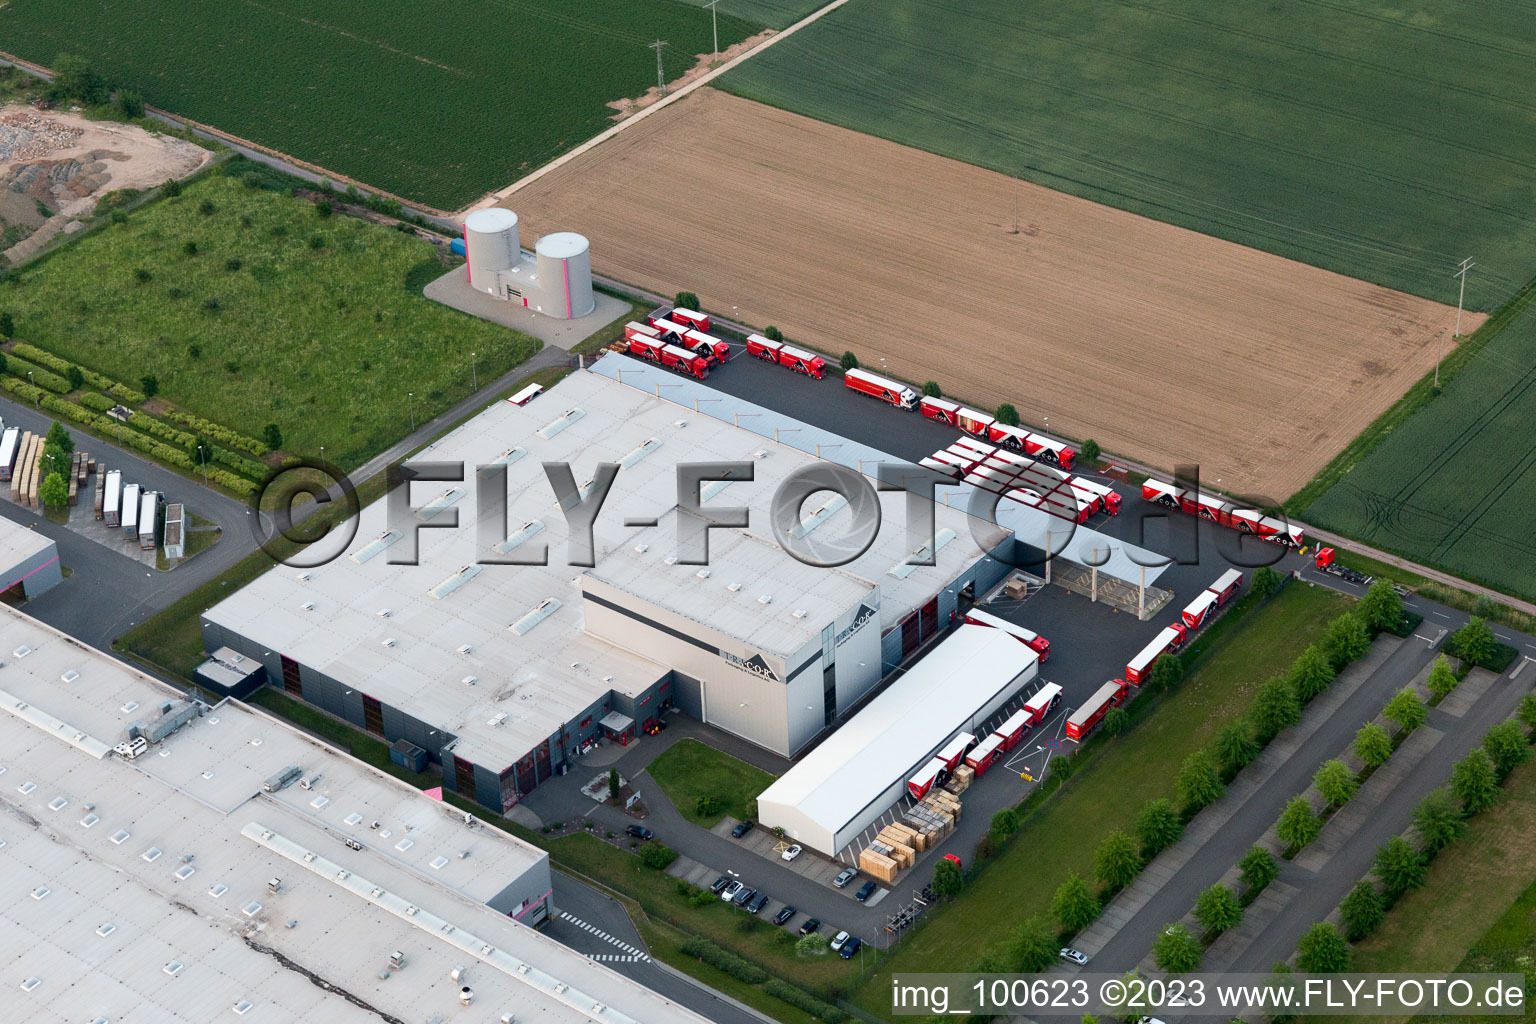 Ottersheim bei Landau in the state Rhineland-Palatinate, Germany seen from above